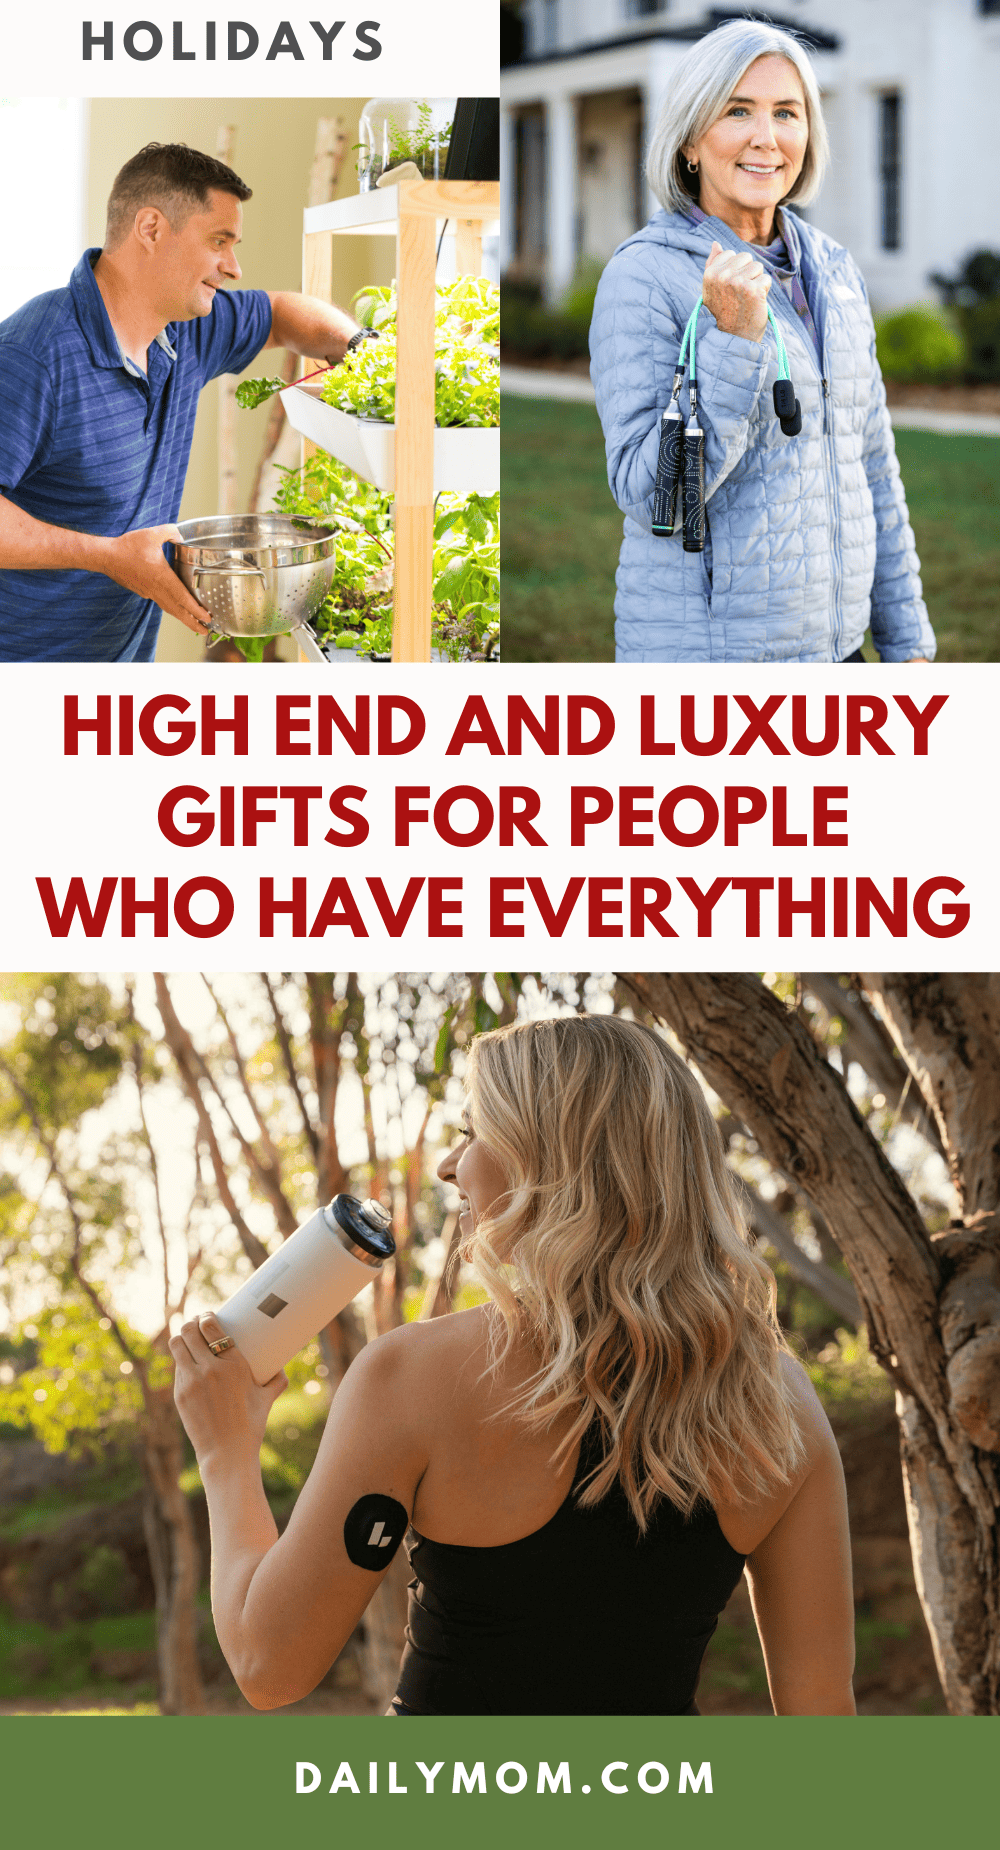 33 High End And Luxury Gifts For People Who Have Everything In 2023 155 Daily Mom, Magazine For Families